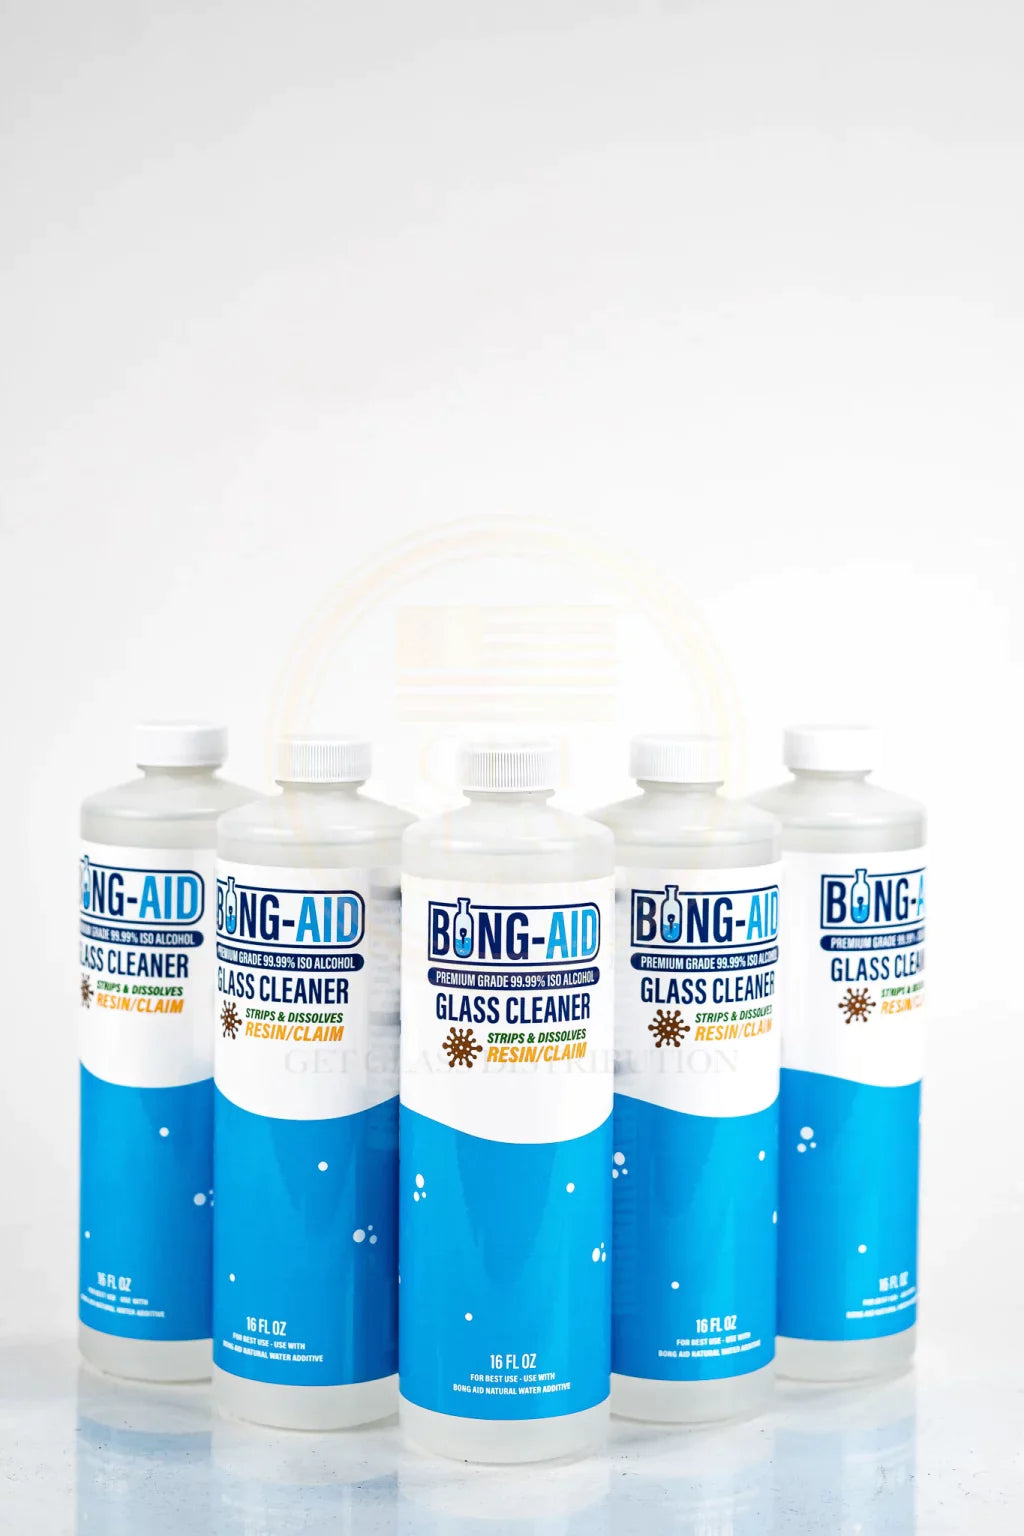 Bong Aid Glass Cleaner | 16oz Bong Aid 99.9% Isopropyl Alcohol Cleaner